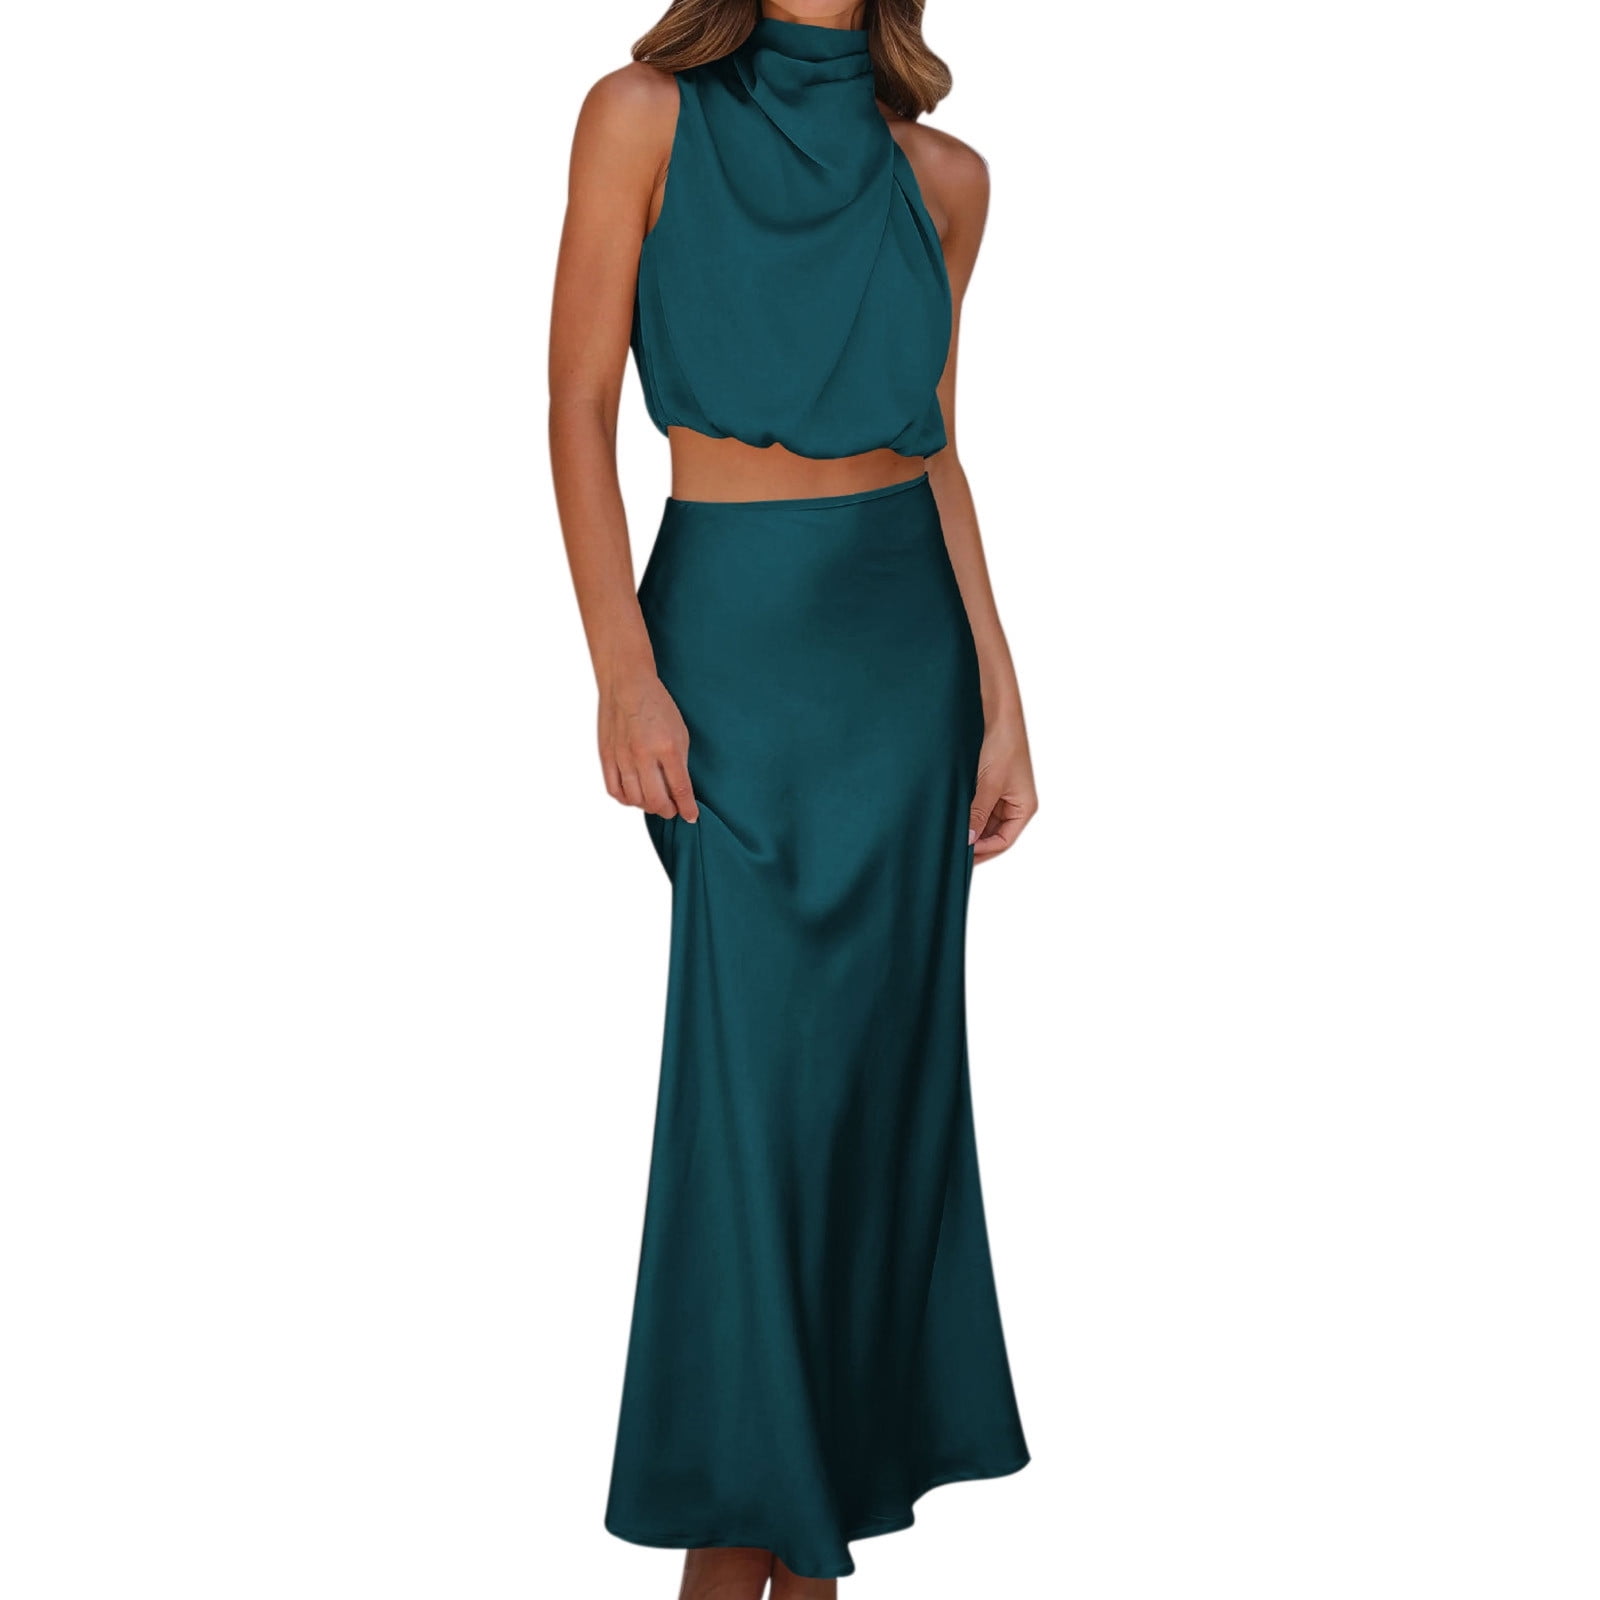 Long Dresses For Women Elegant And Halter Neck Maxi Casual And Stylish ...